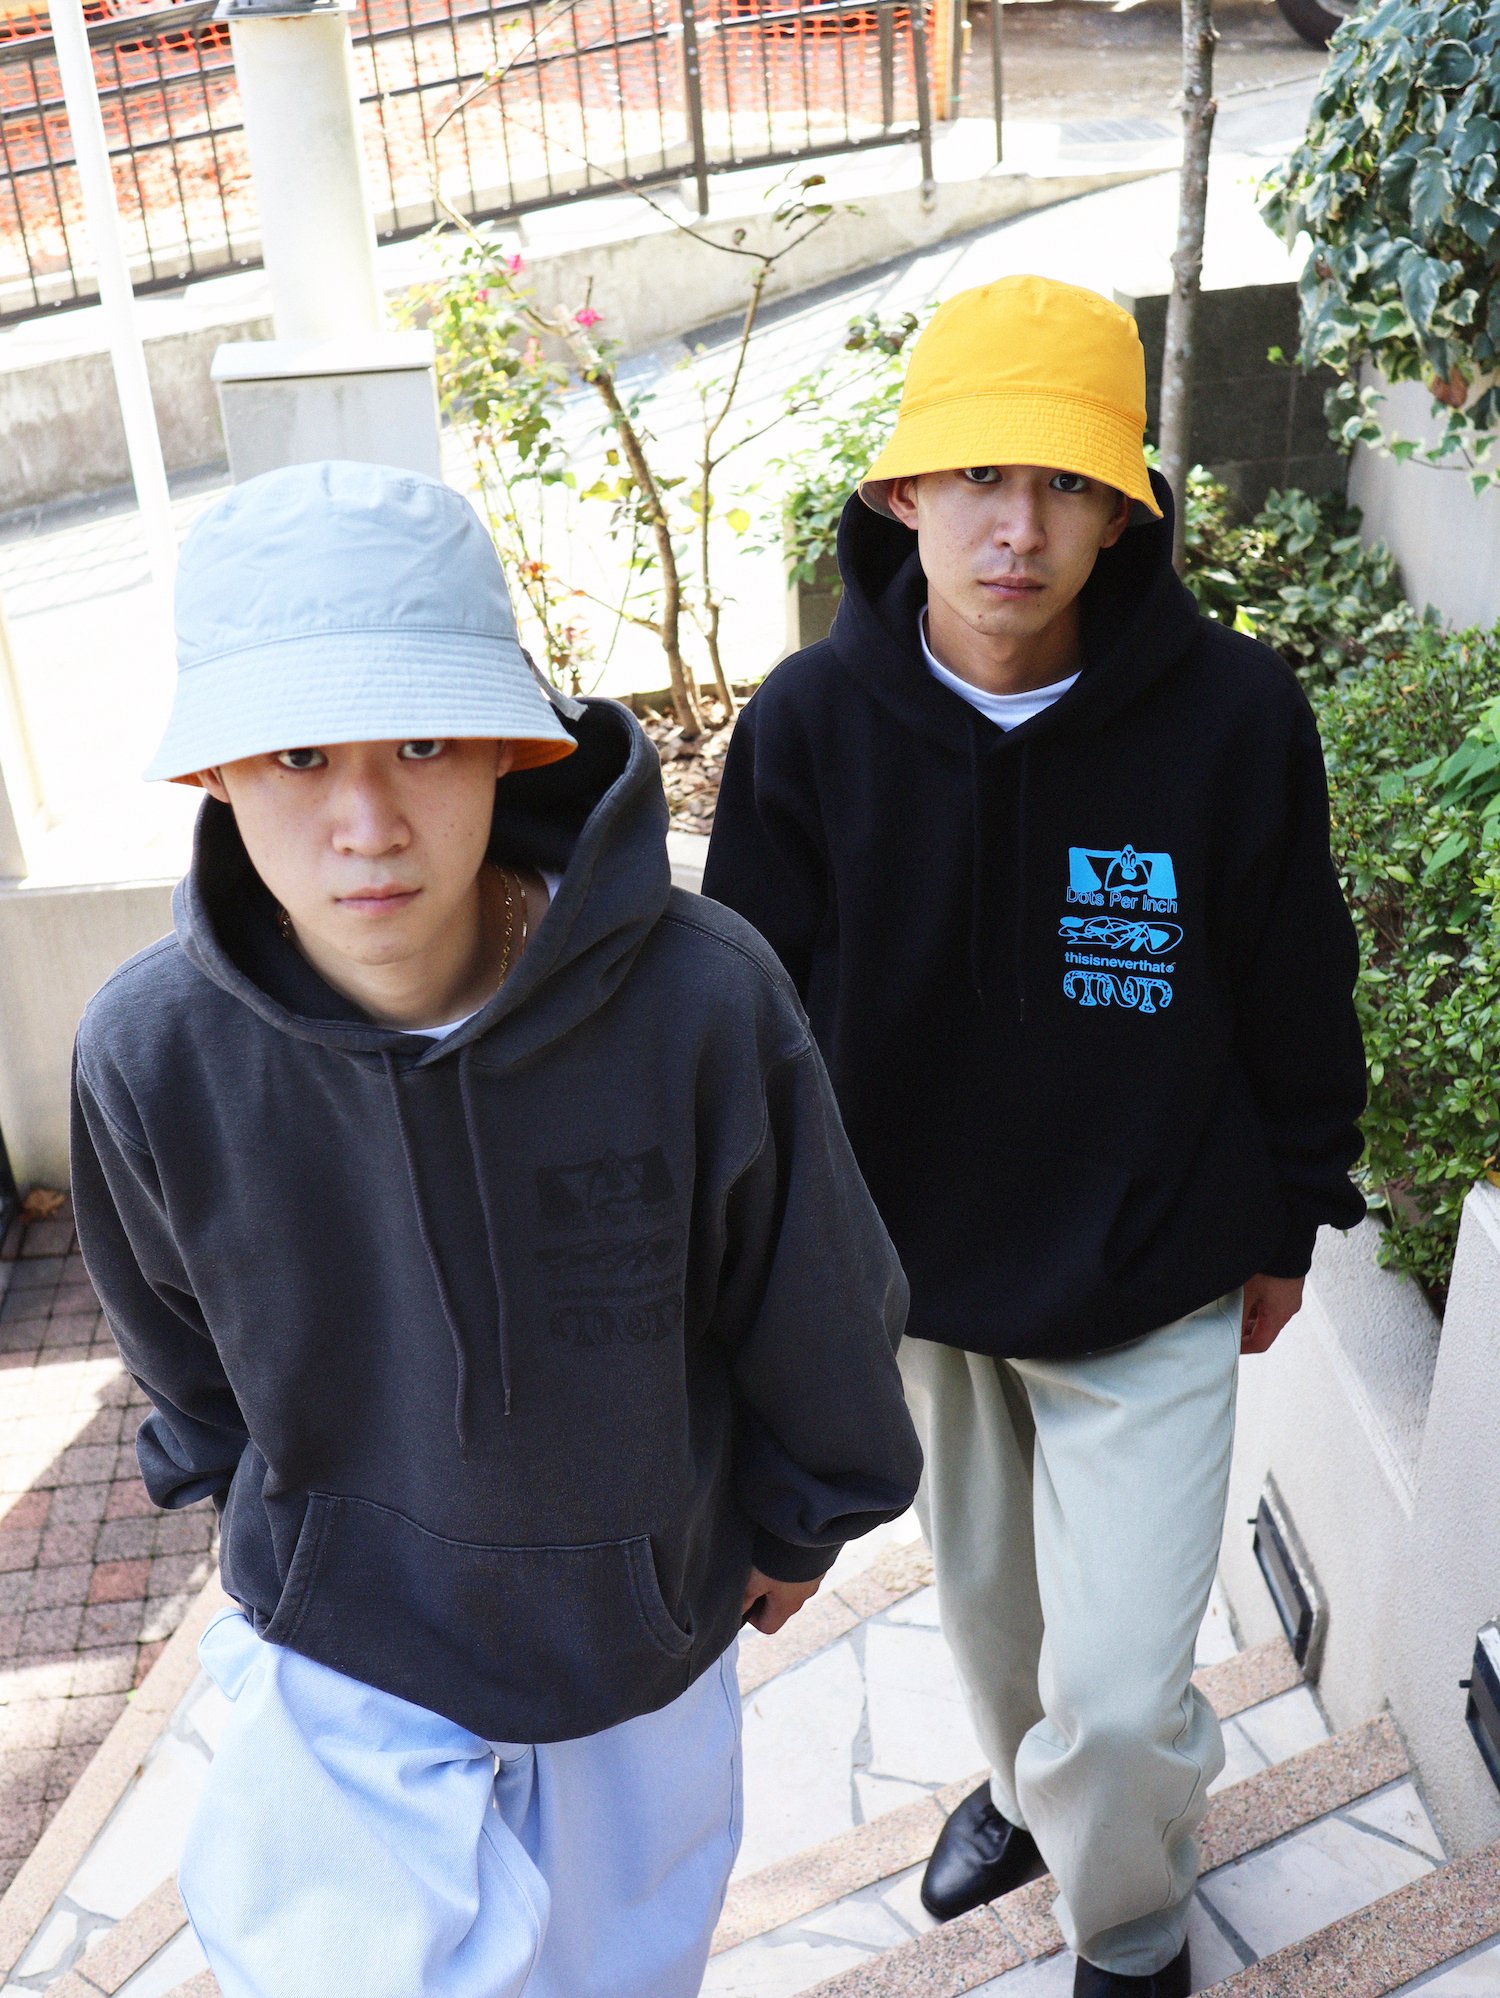 thisisneverthat×SHINKNOWSUKEDPI Hoodie - Apple Butter Store